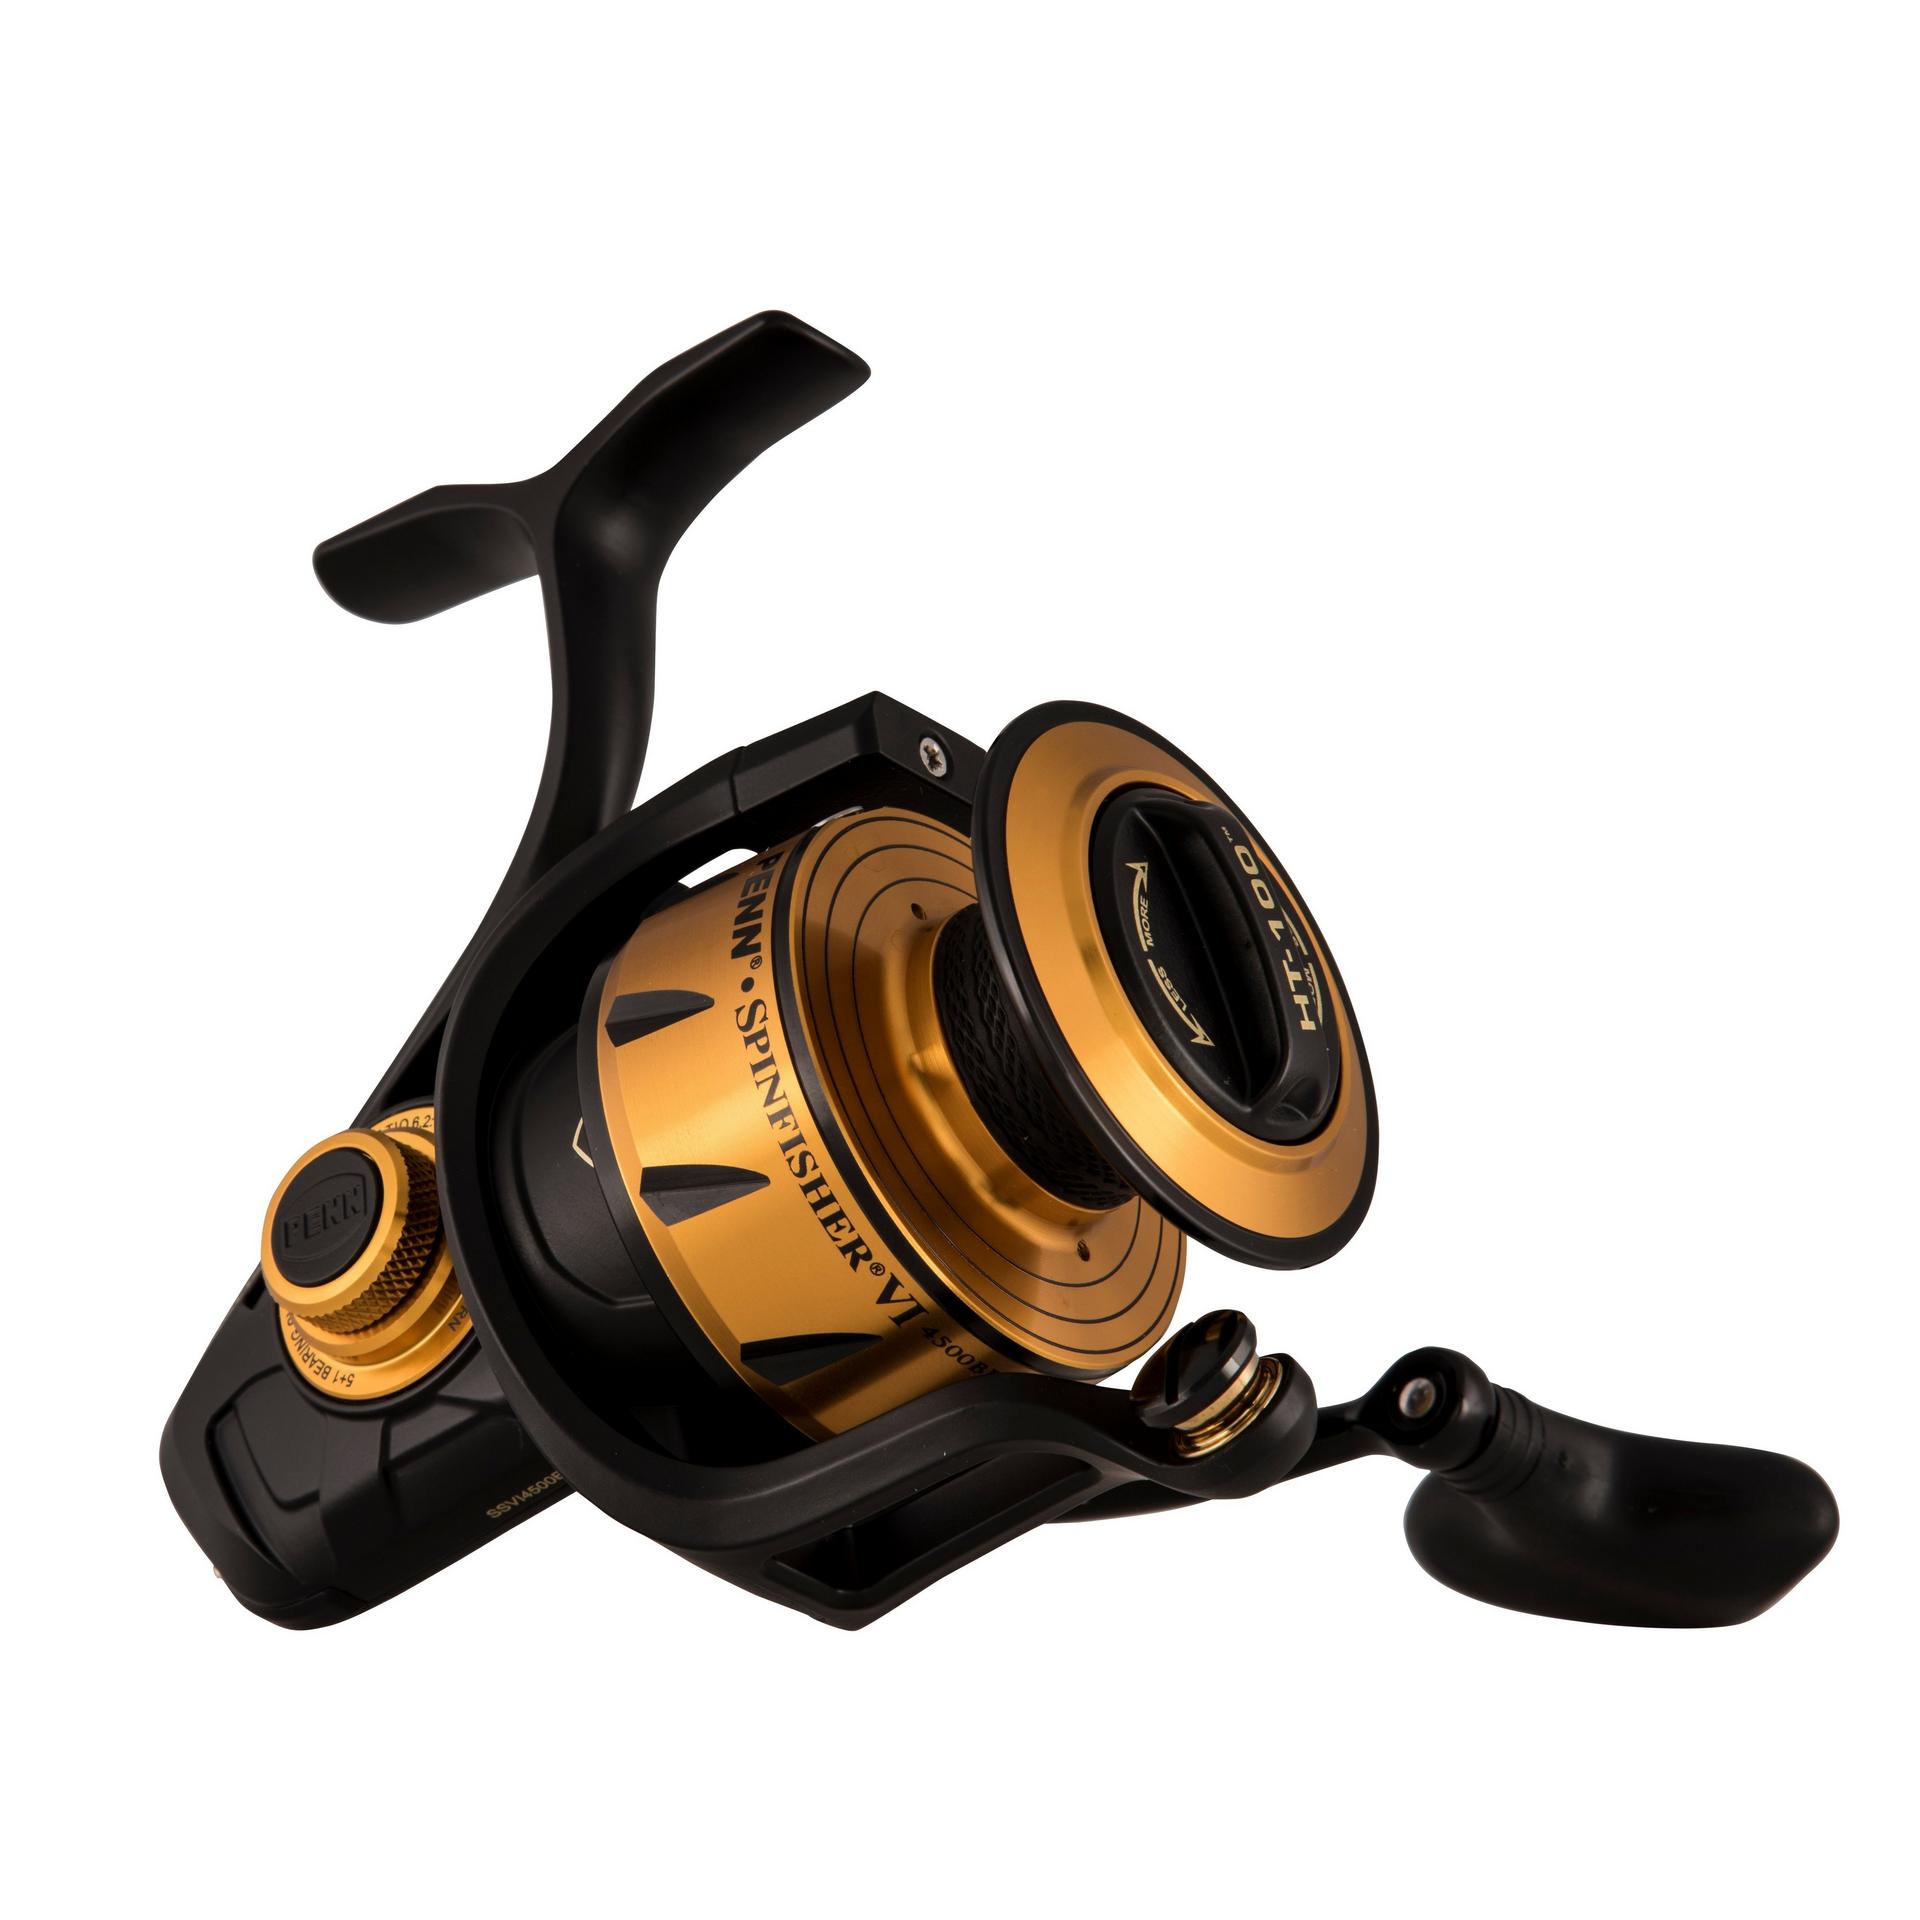 CARRETE PENN SPINFISHER SS VII 2500 EU SPINFISHER VII SP REEL BX